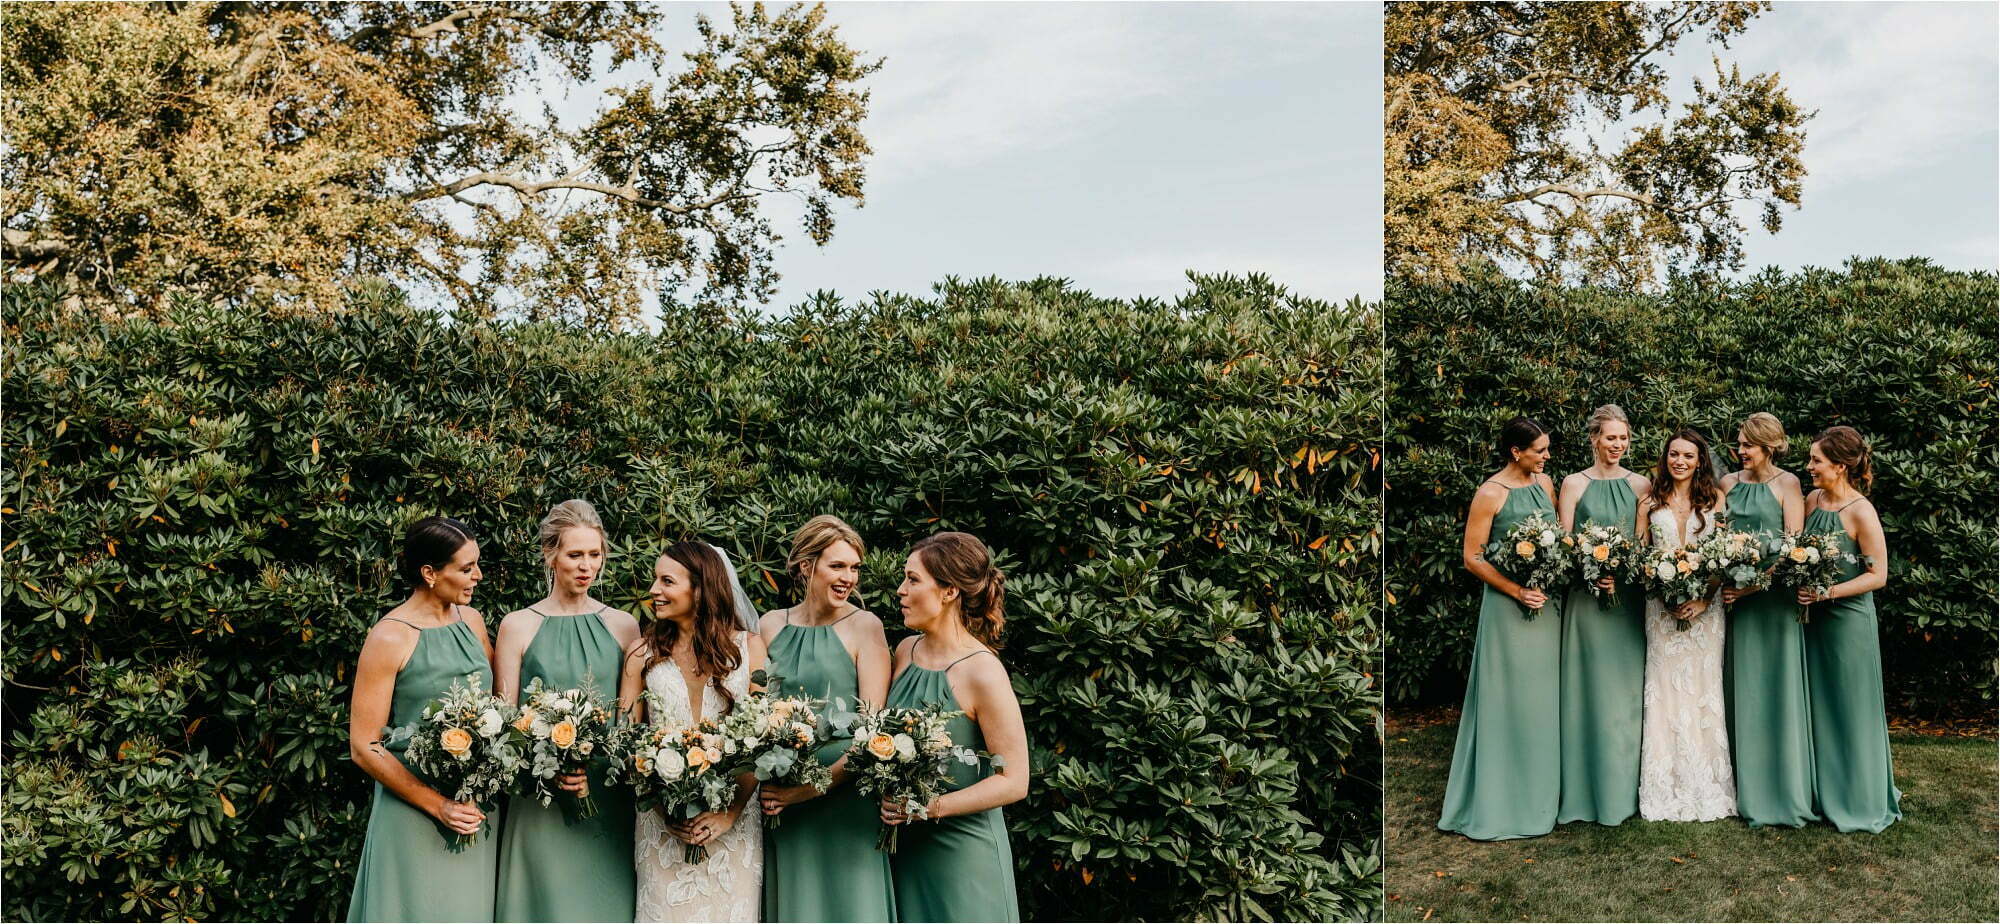 farm micro wedding scottish borders bride and bridesmaids in sage green dresses with bouquets laughing